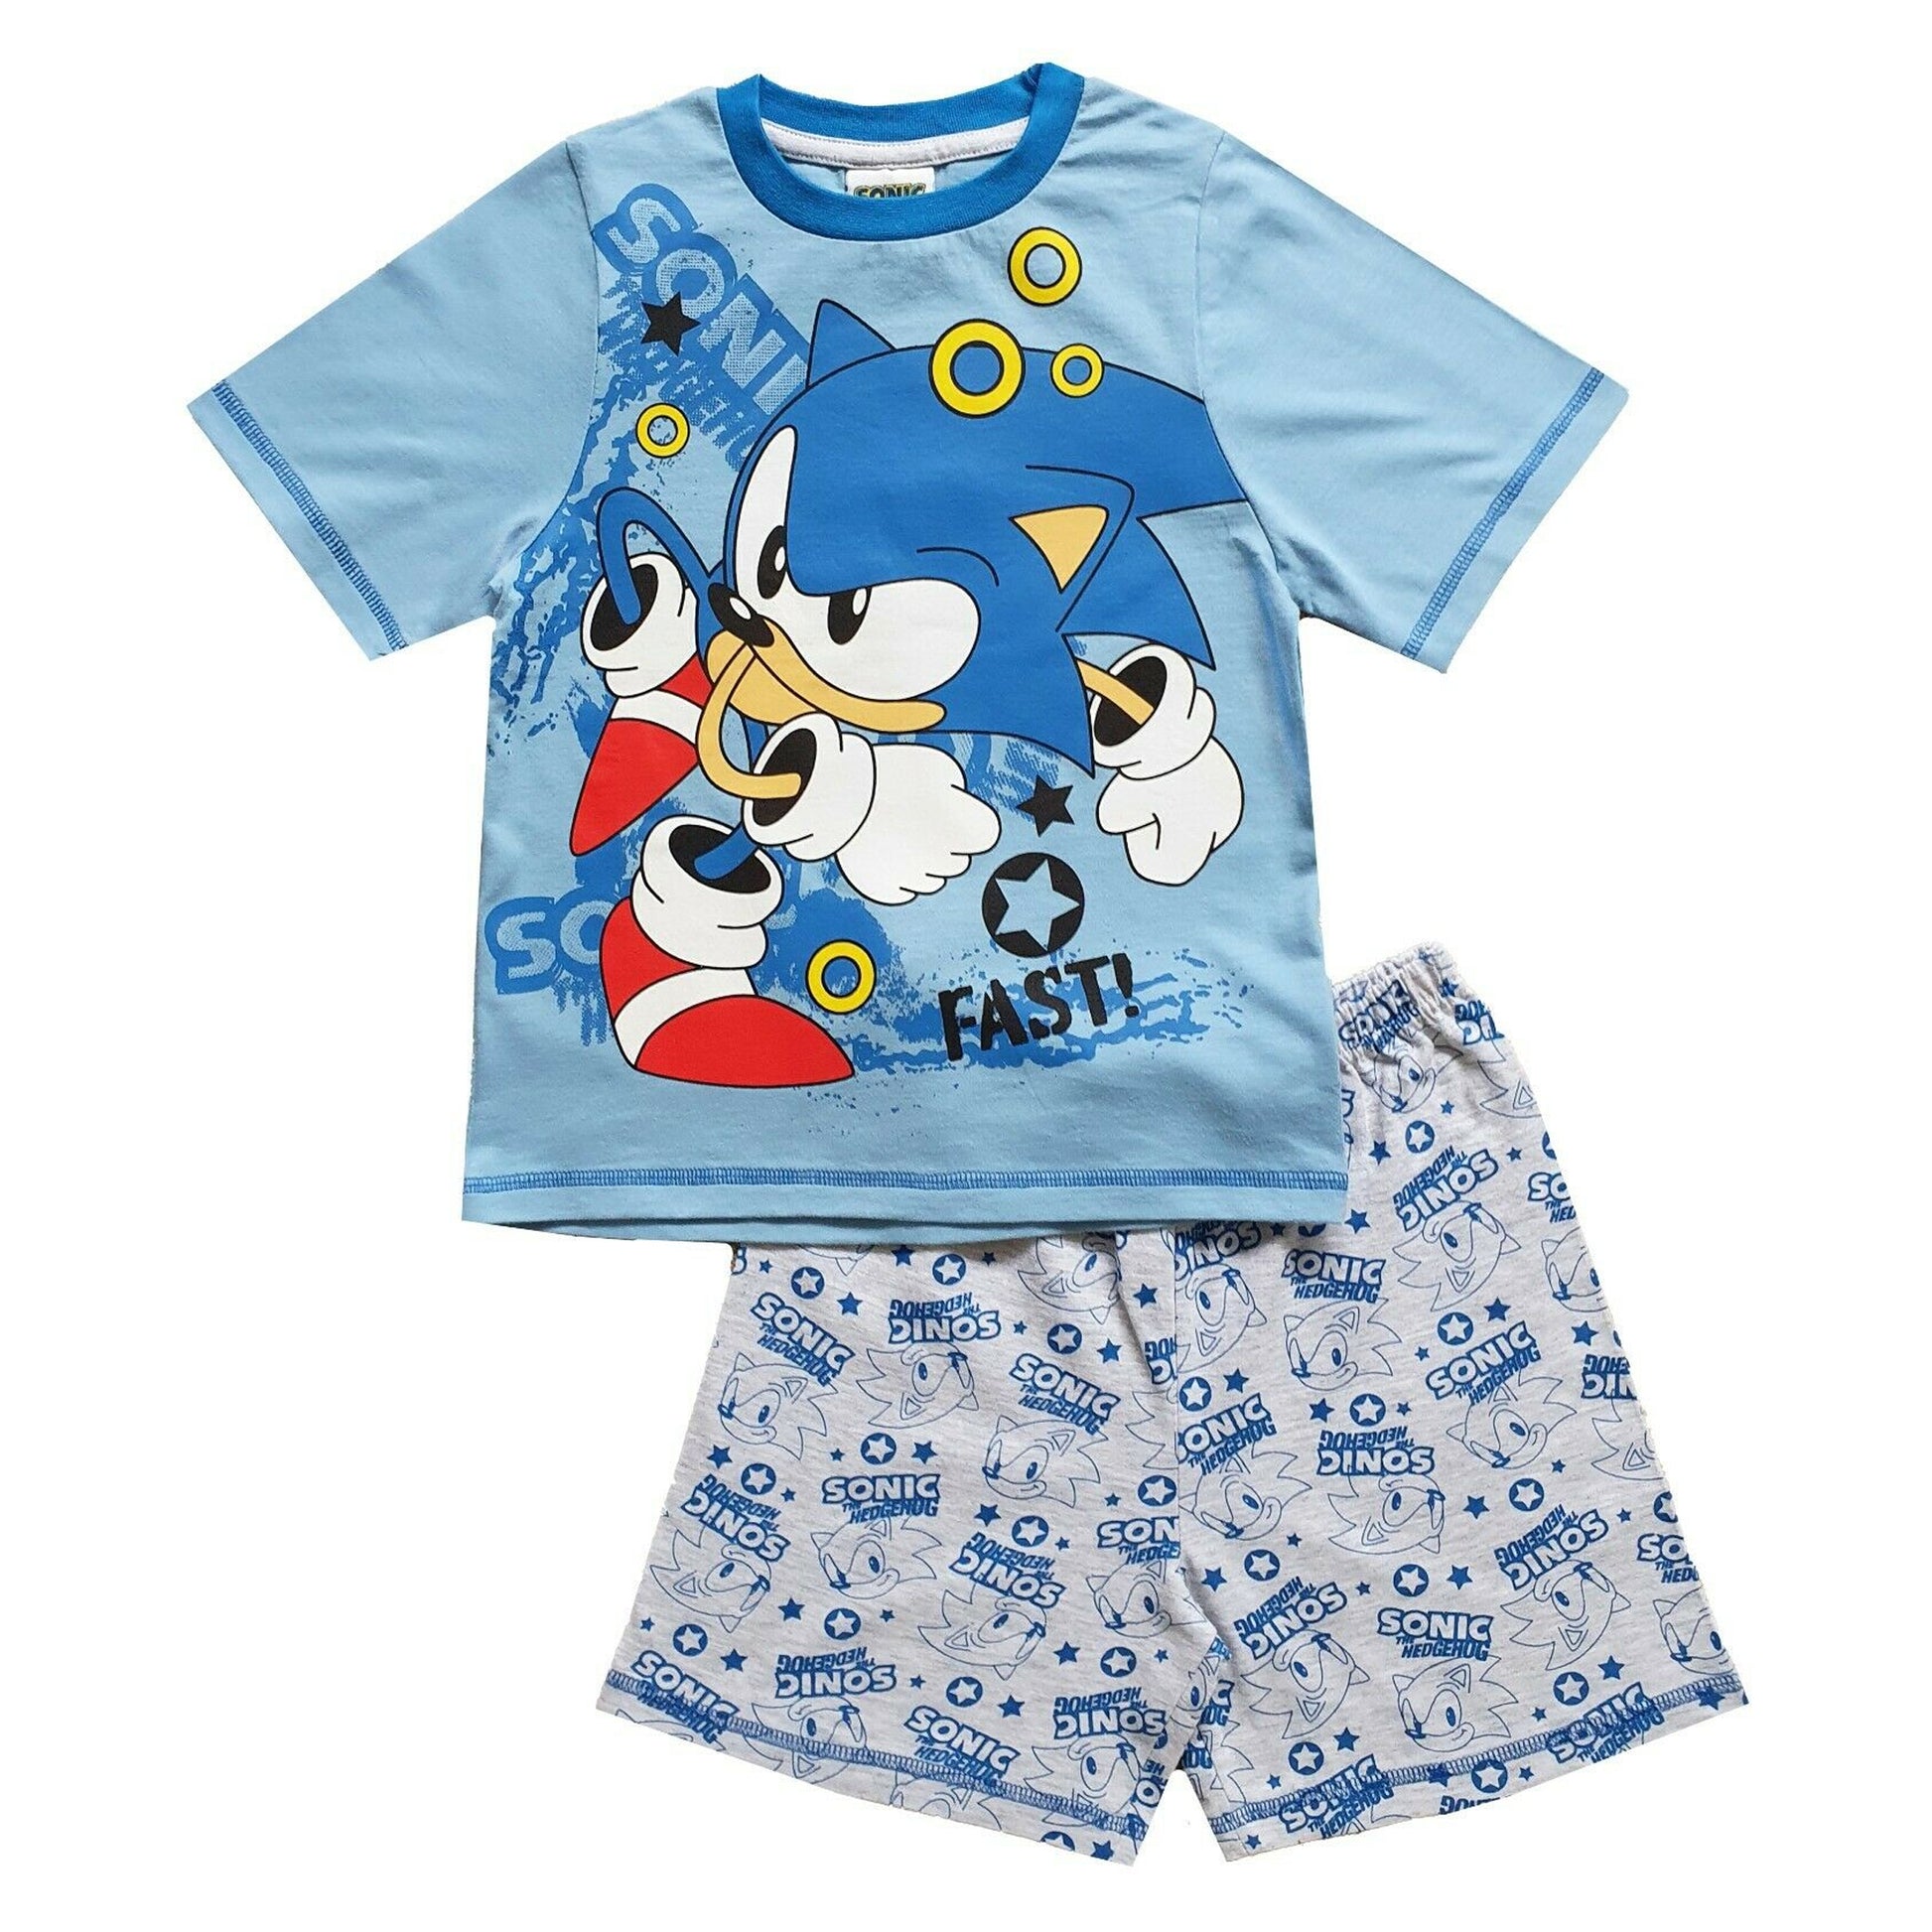 These Sonic the hedgehog pyjamas feature the speedster in a running pose surrounded by the iconic rings and sonic wording printed behind. Matched with a super cool pair of grey marl shorts with an all over print of sonic.